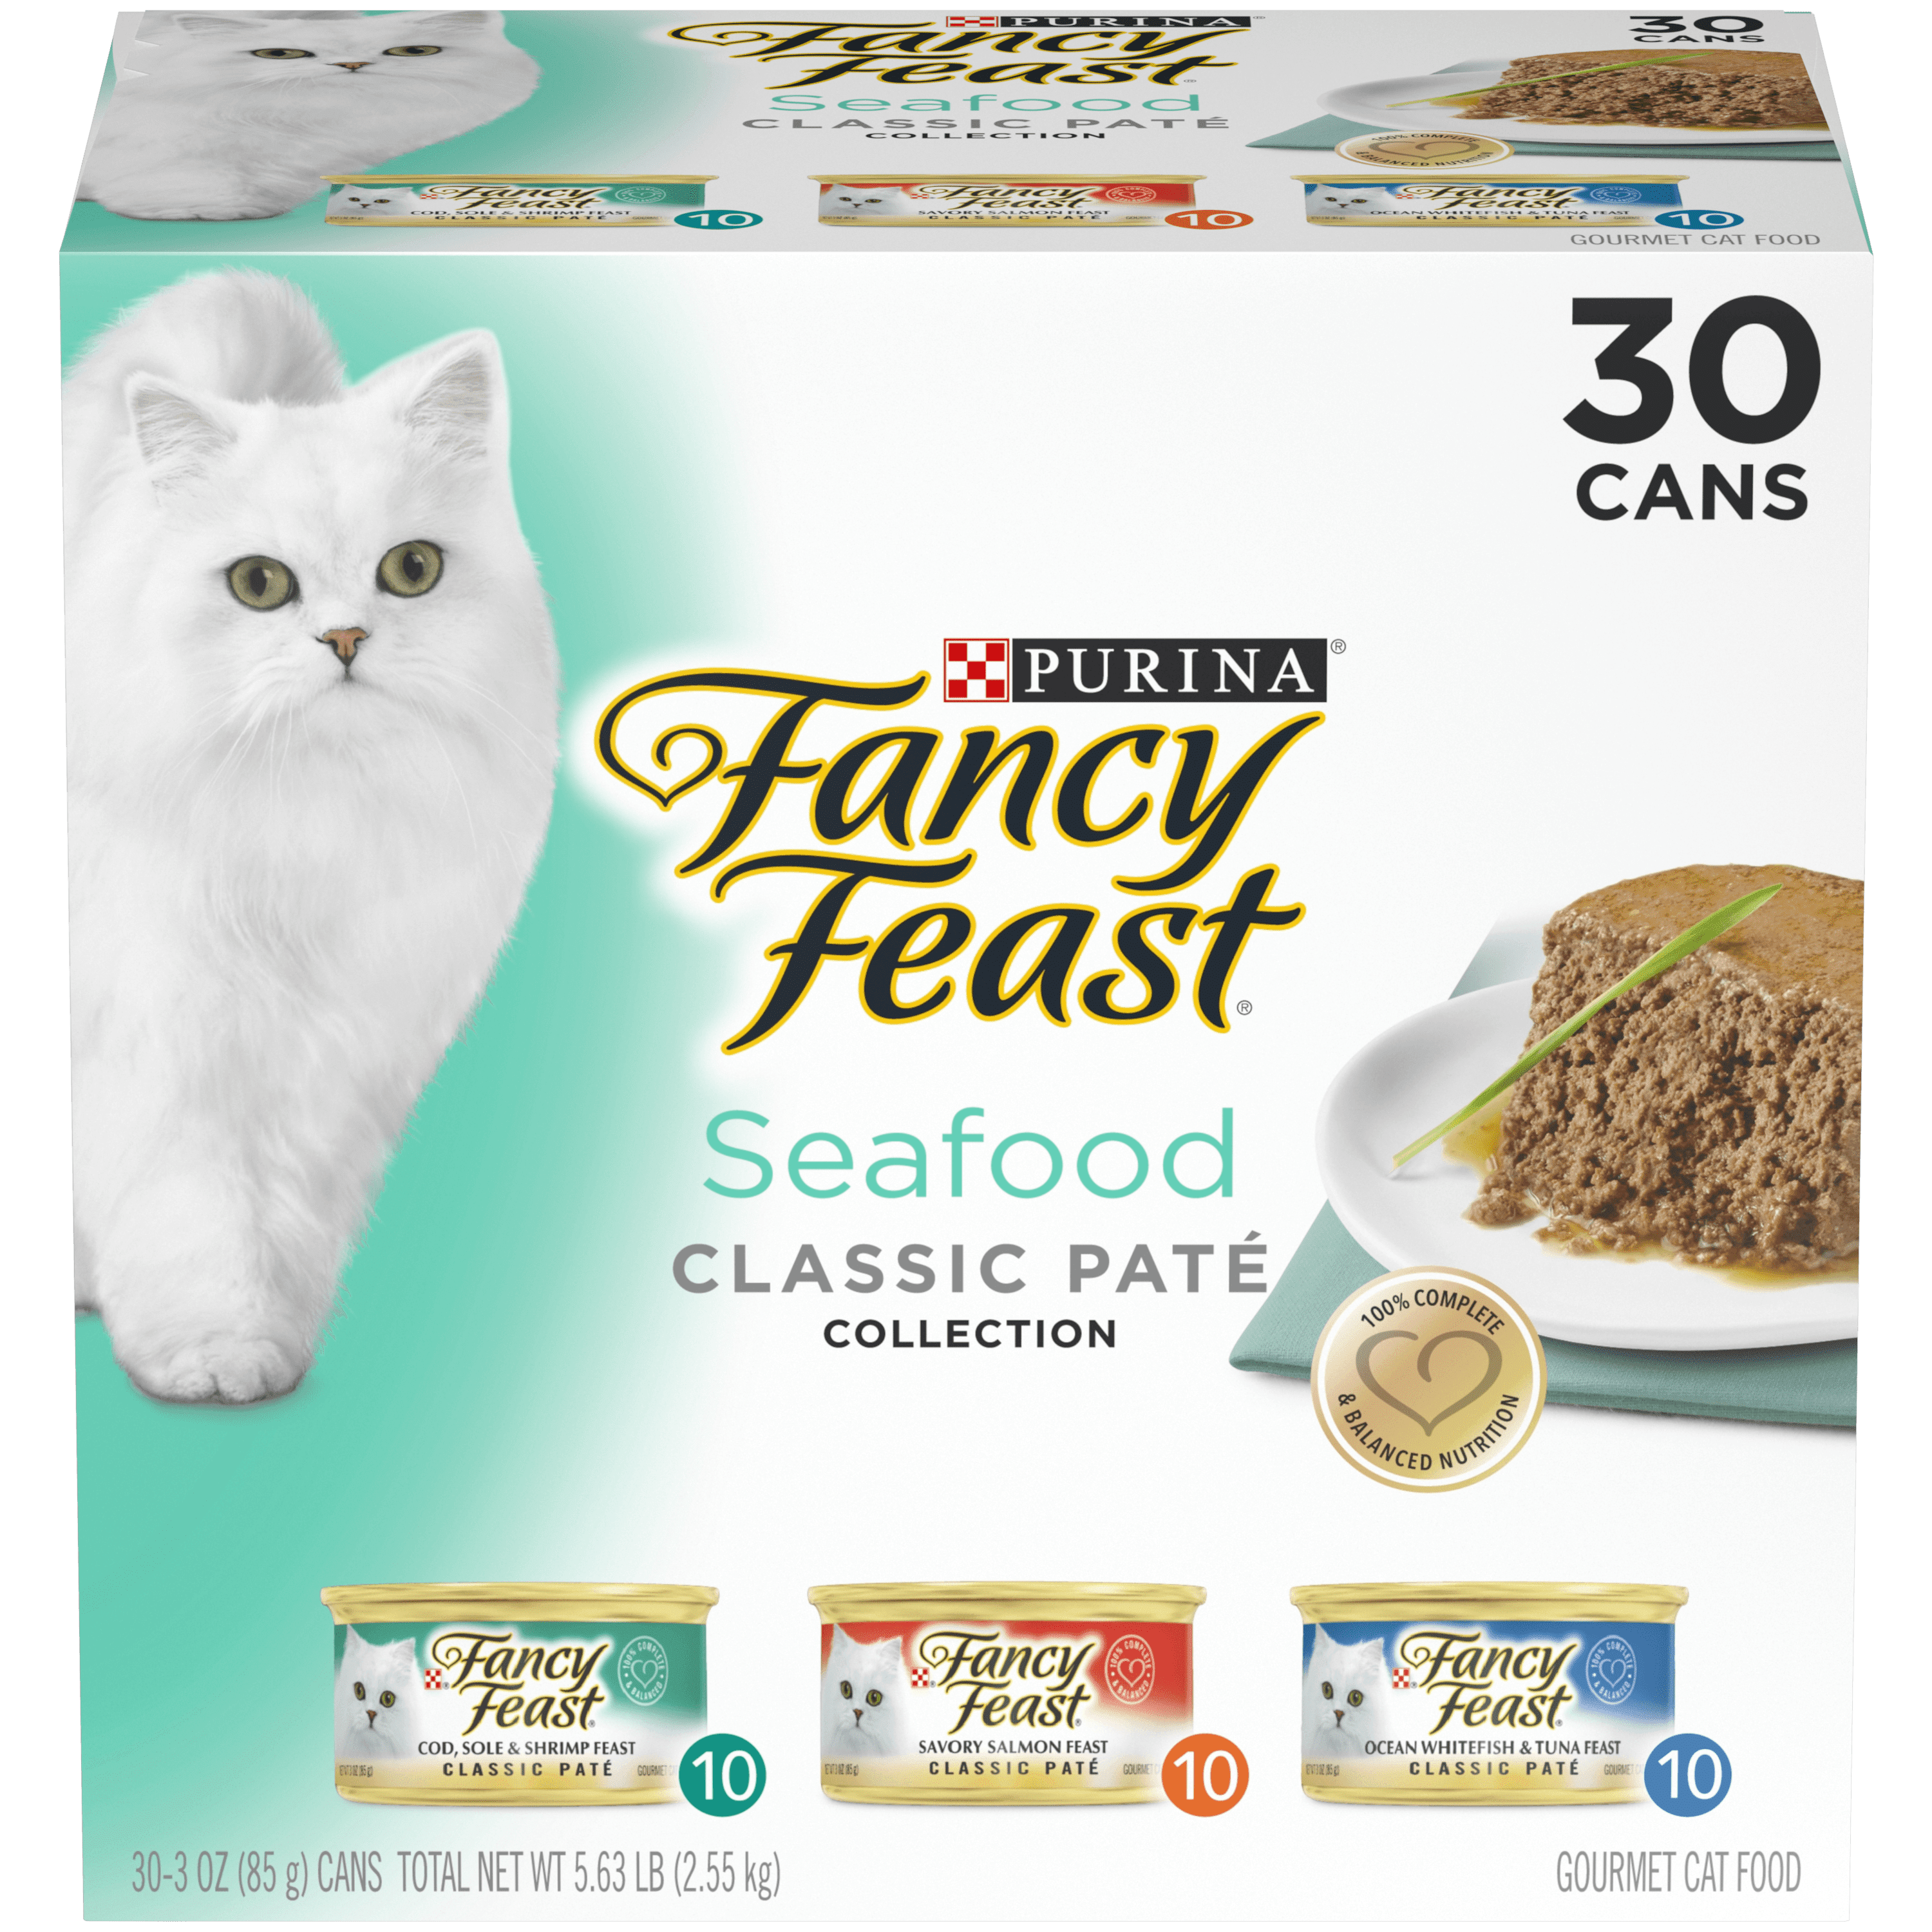 Purina Cat Chow Complete Dry Cat Food & Fancy Feast Seafood Classic